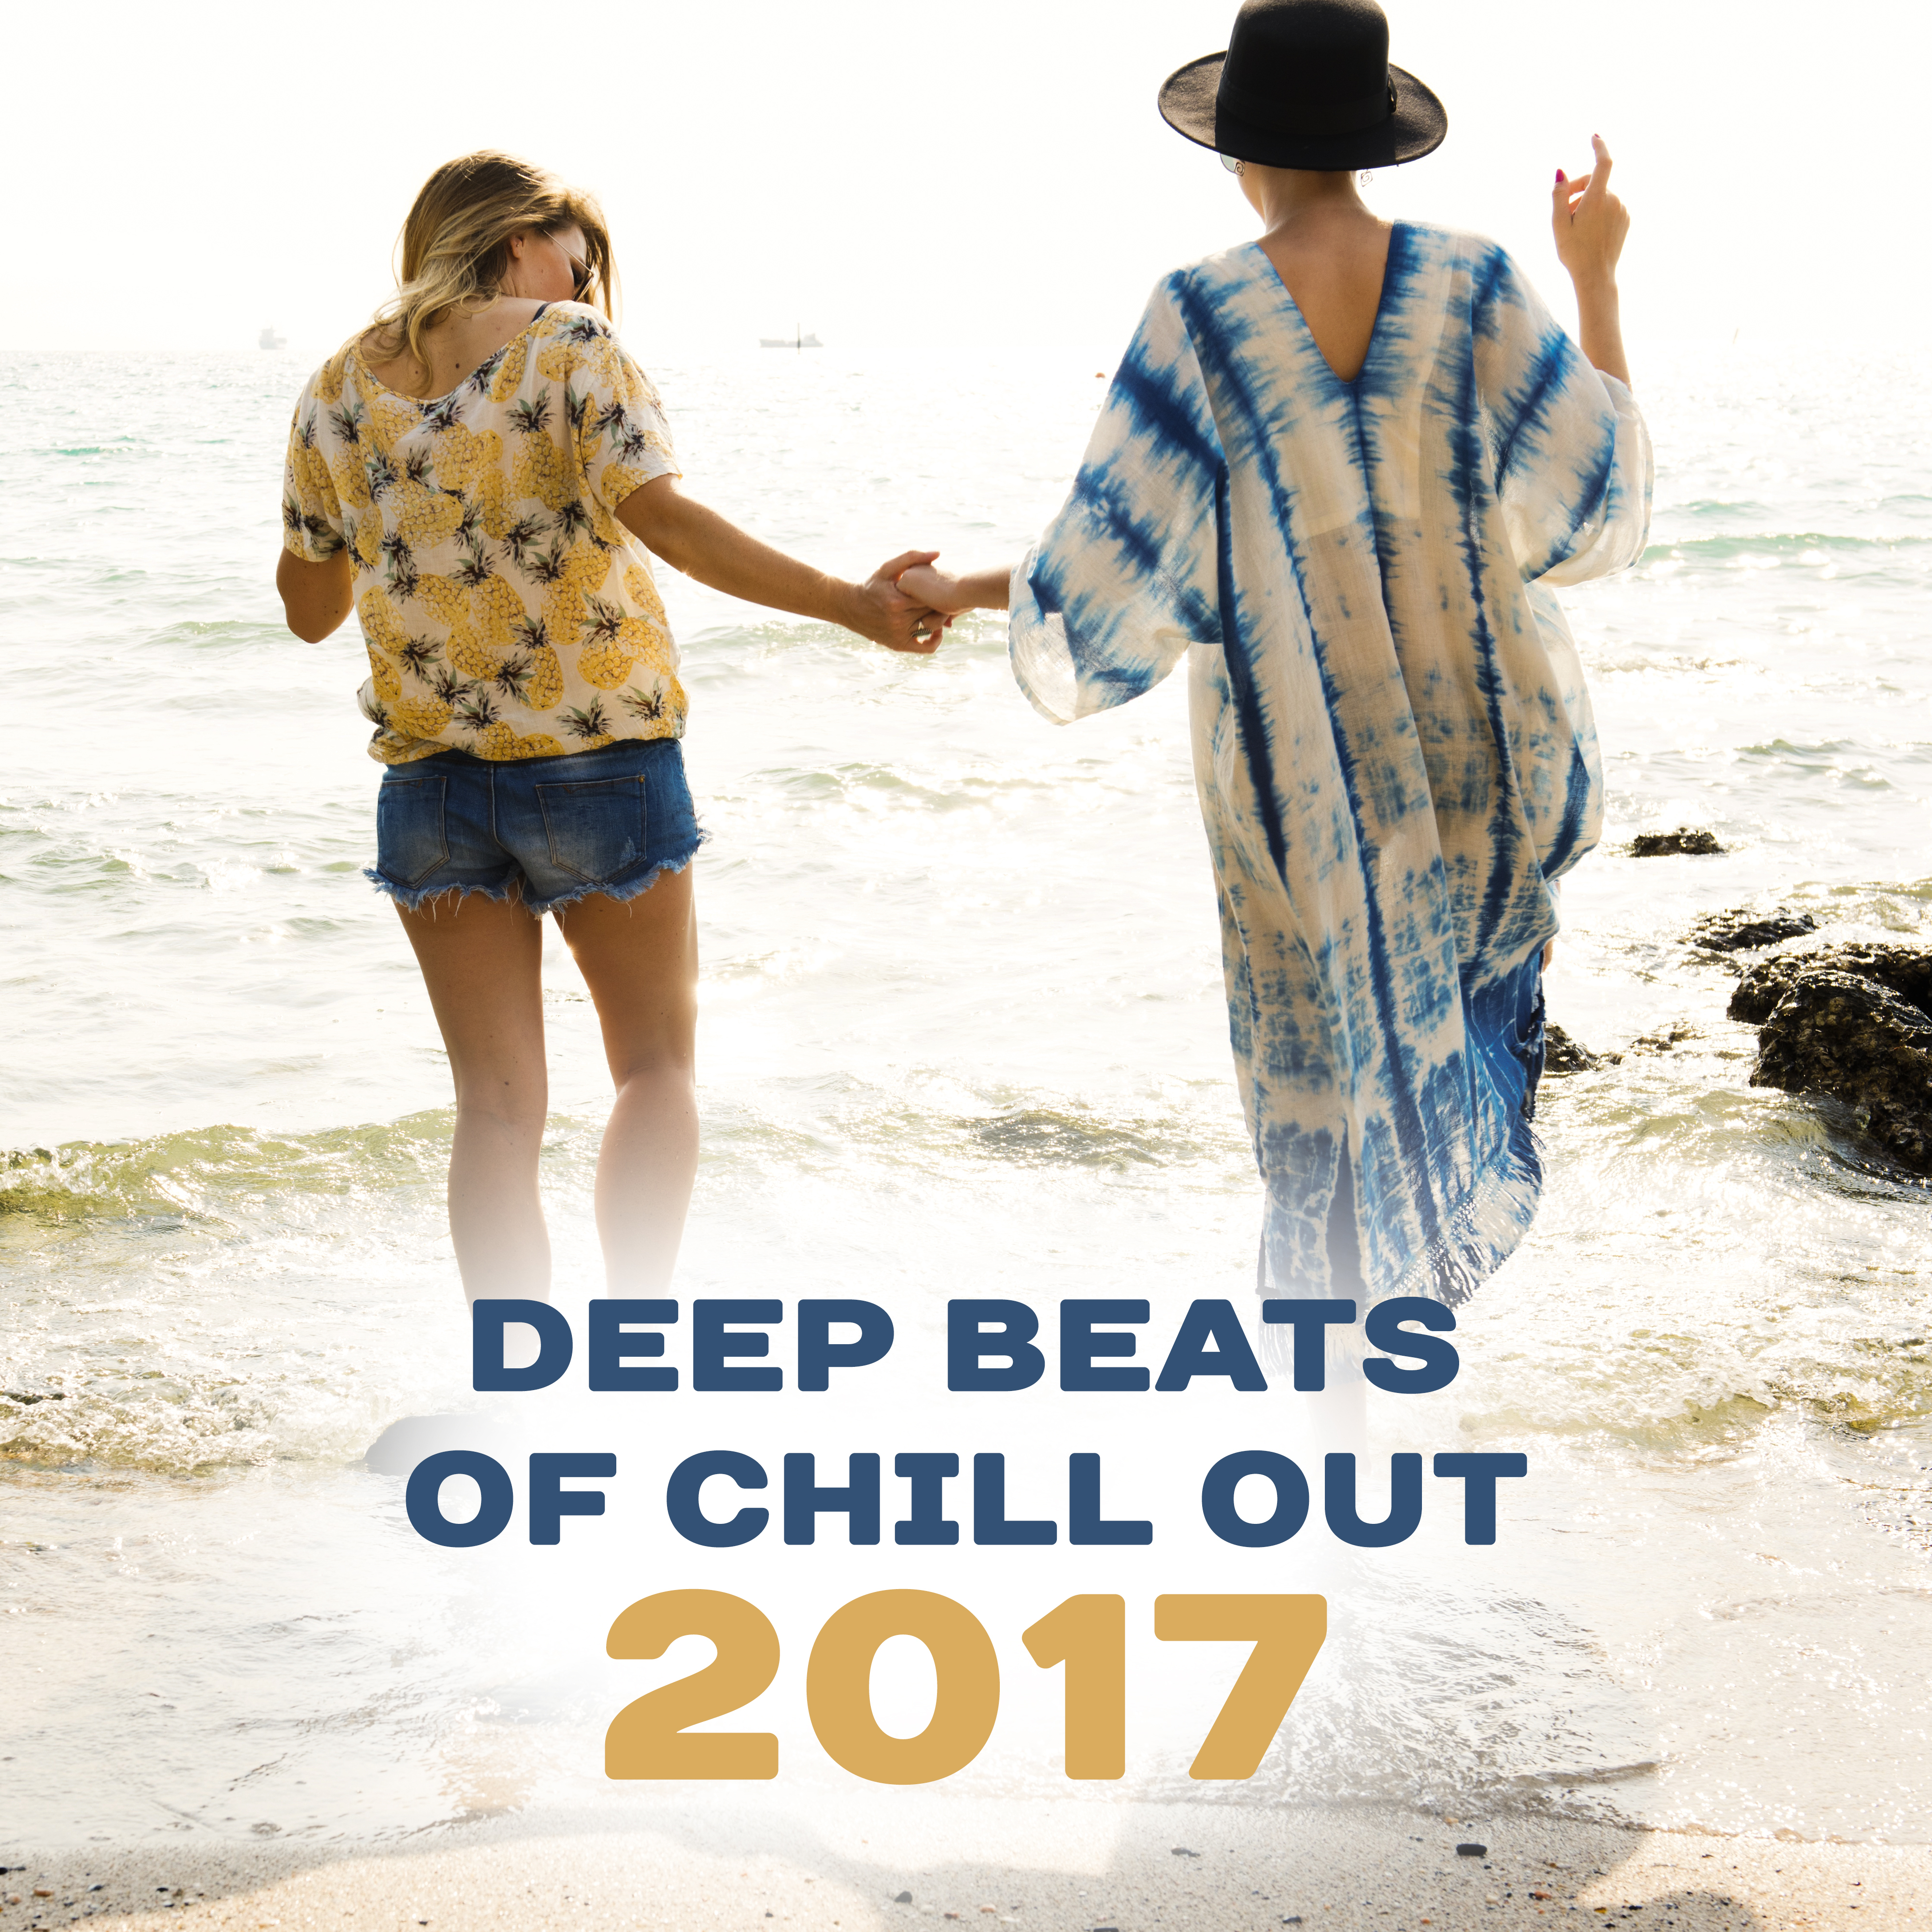 Deep Beats of Chill Out 2017 – Chill Out Party Music, Summertime, Ibiza Relaxation, Beach Music